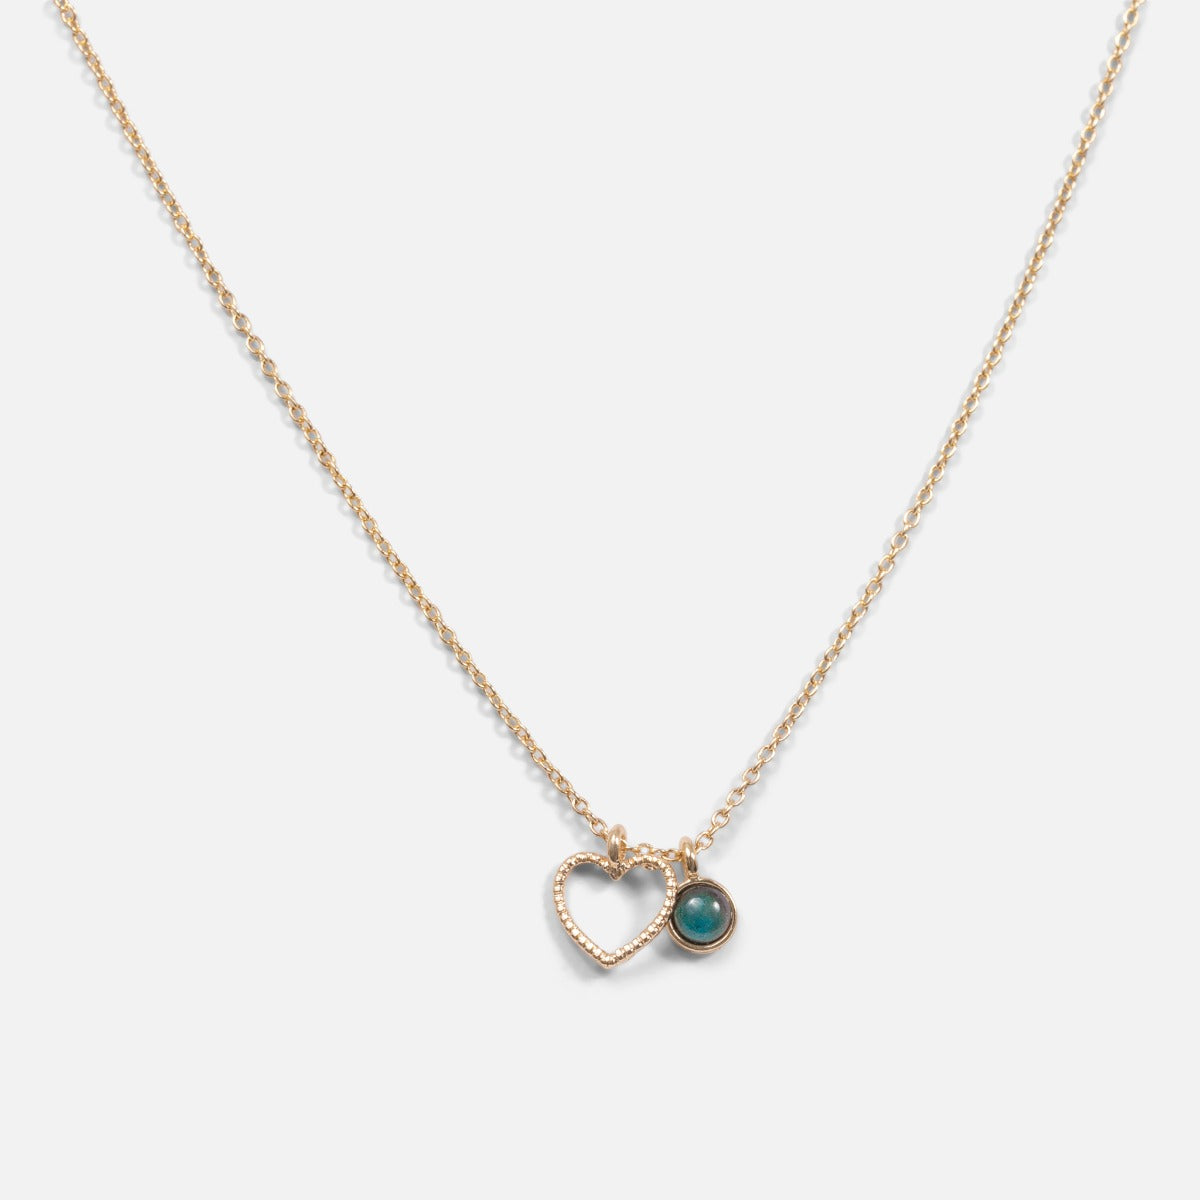 Golden pendant with openwork heart charm and turquoise stone